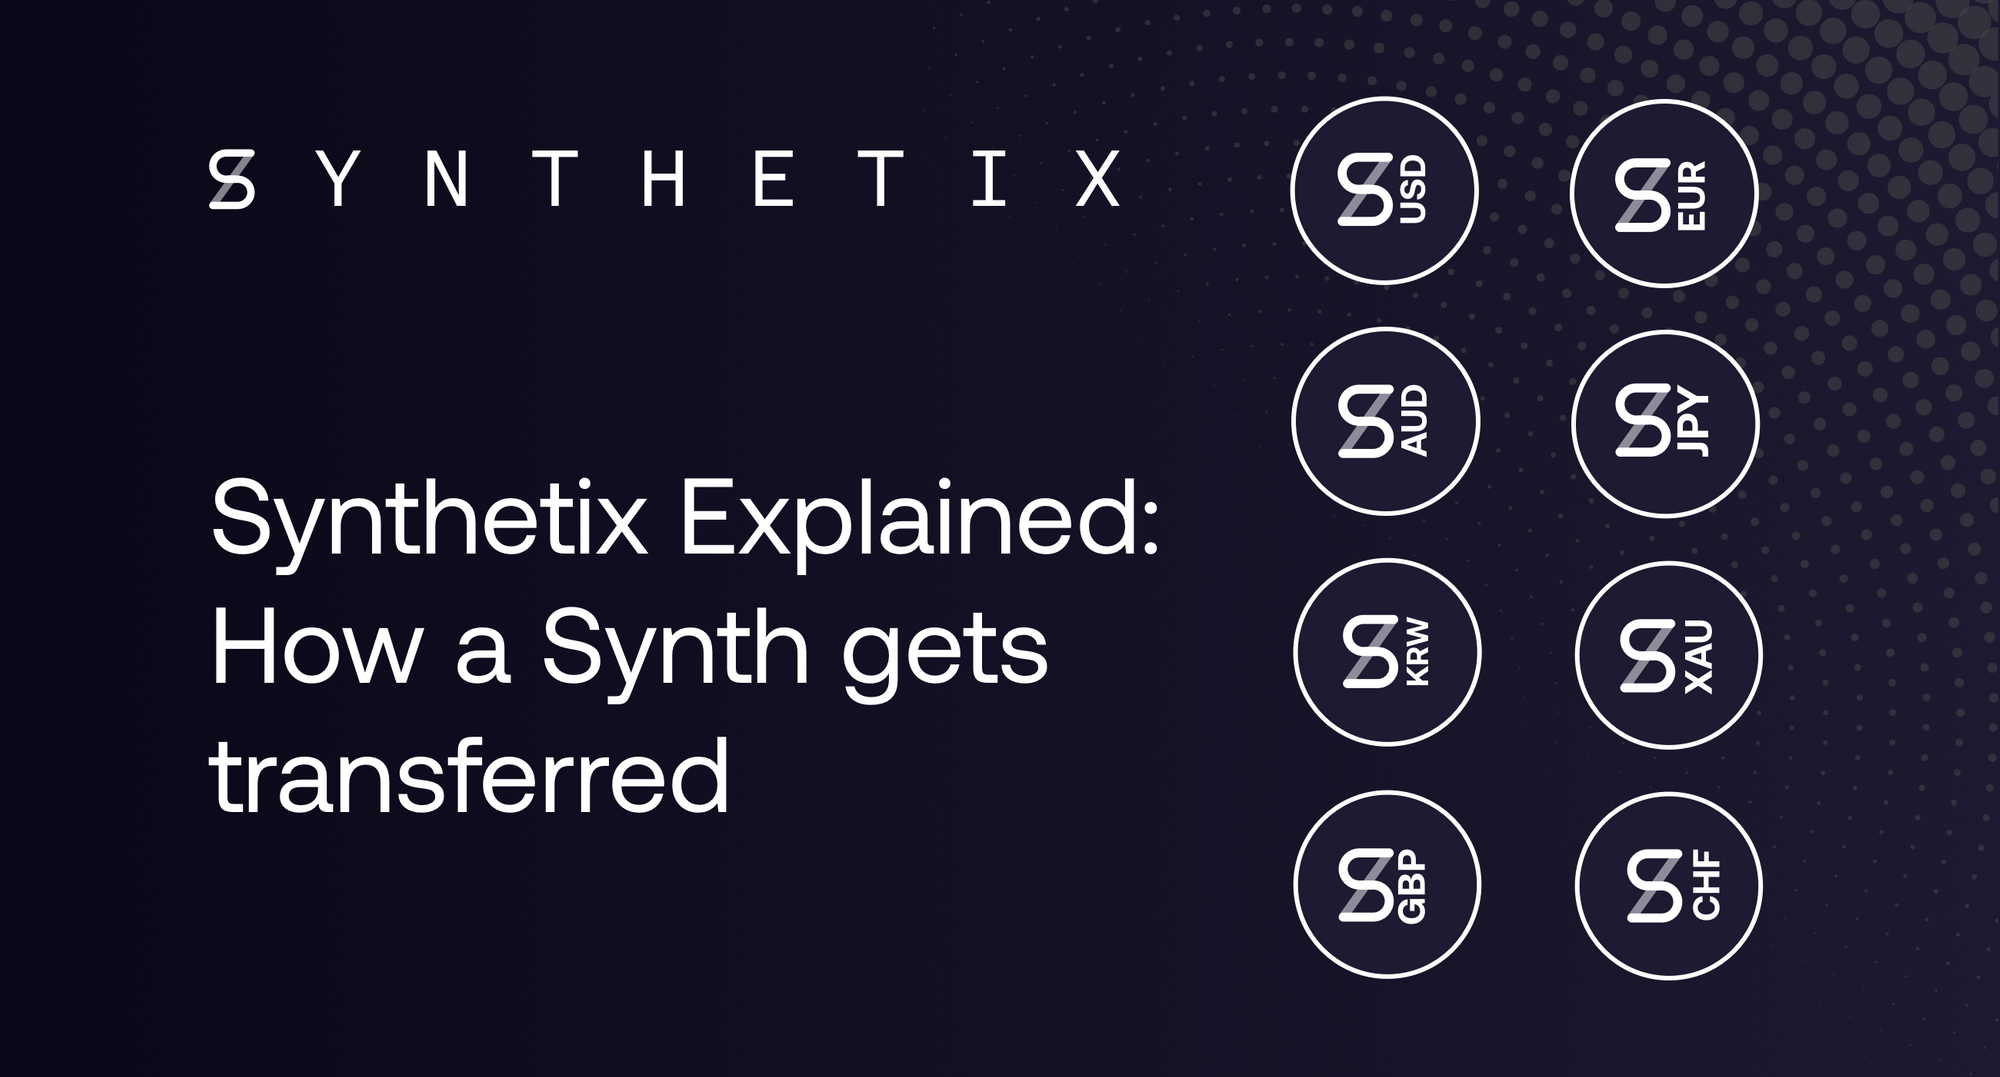 Synthetix Explained: how a Synth gets transferred